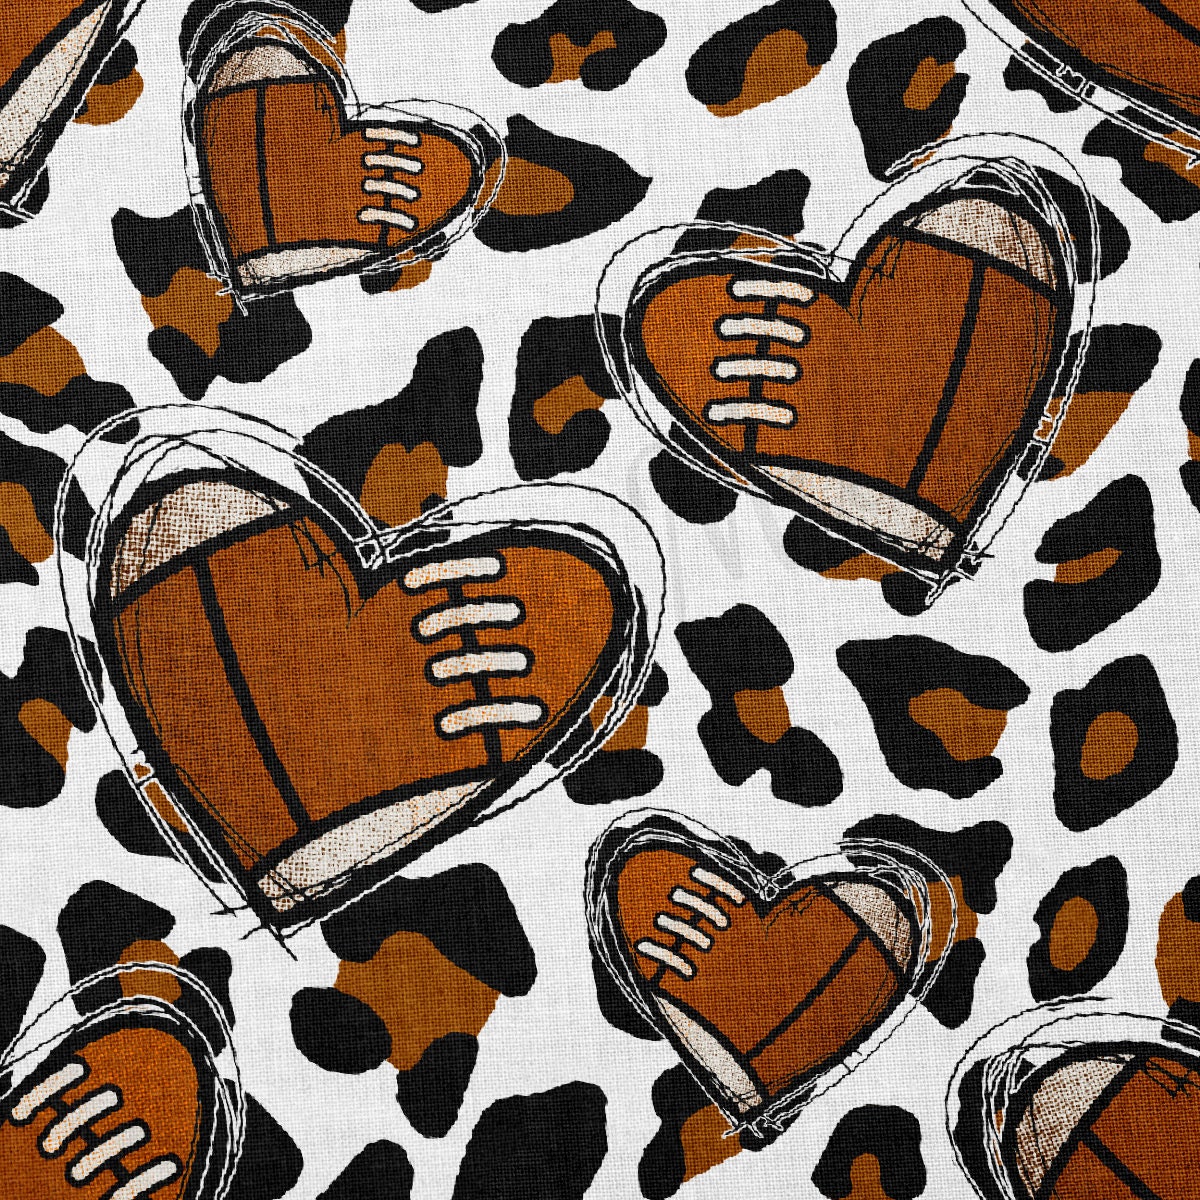 Football 100% Cotton Fabric By the Yard Printed in USA Cotton Sateen -  Cotton Printed СTN1984 Sport